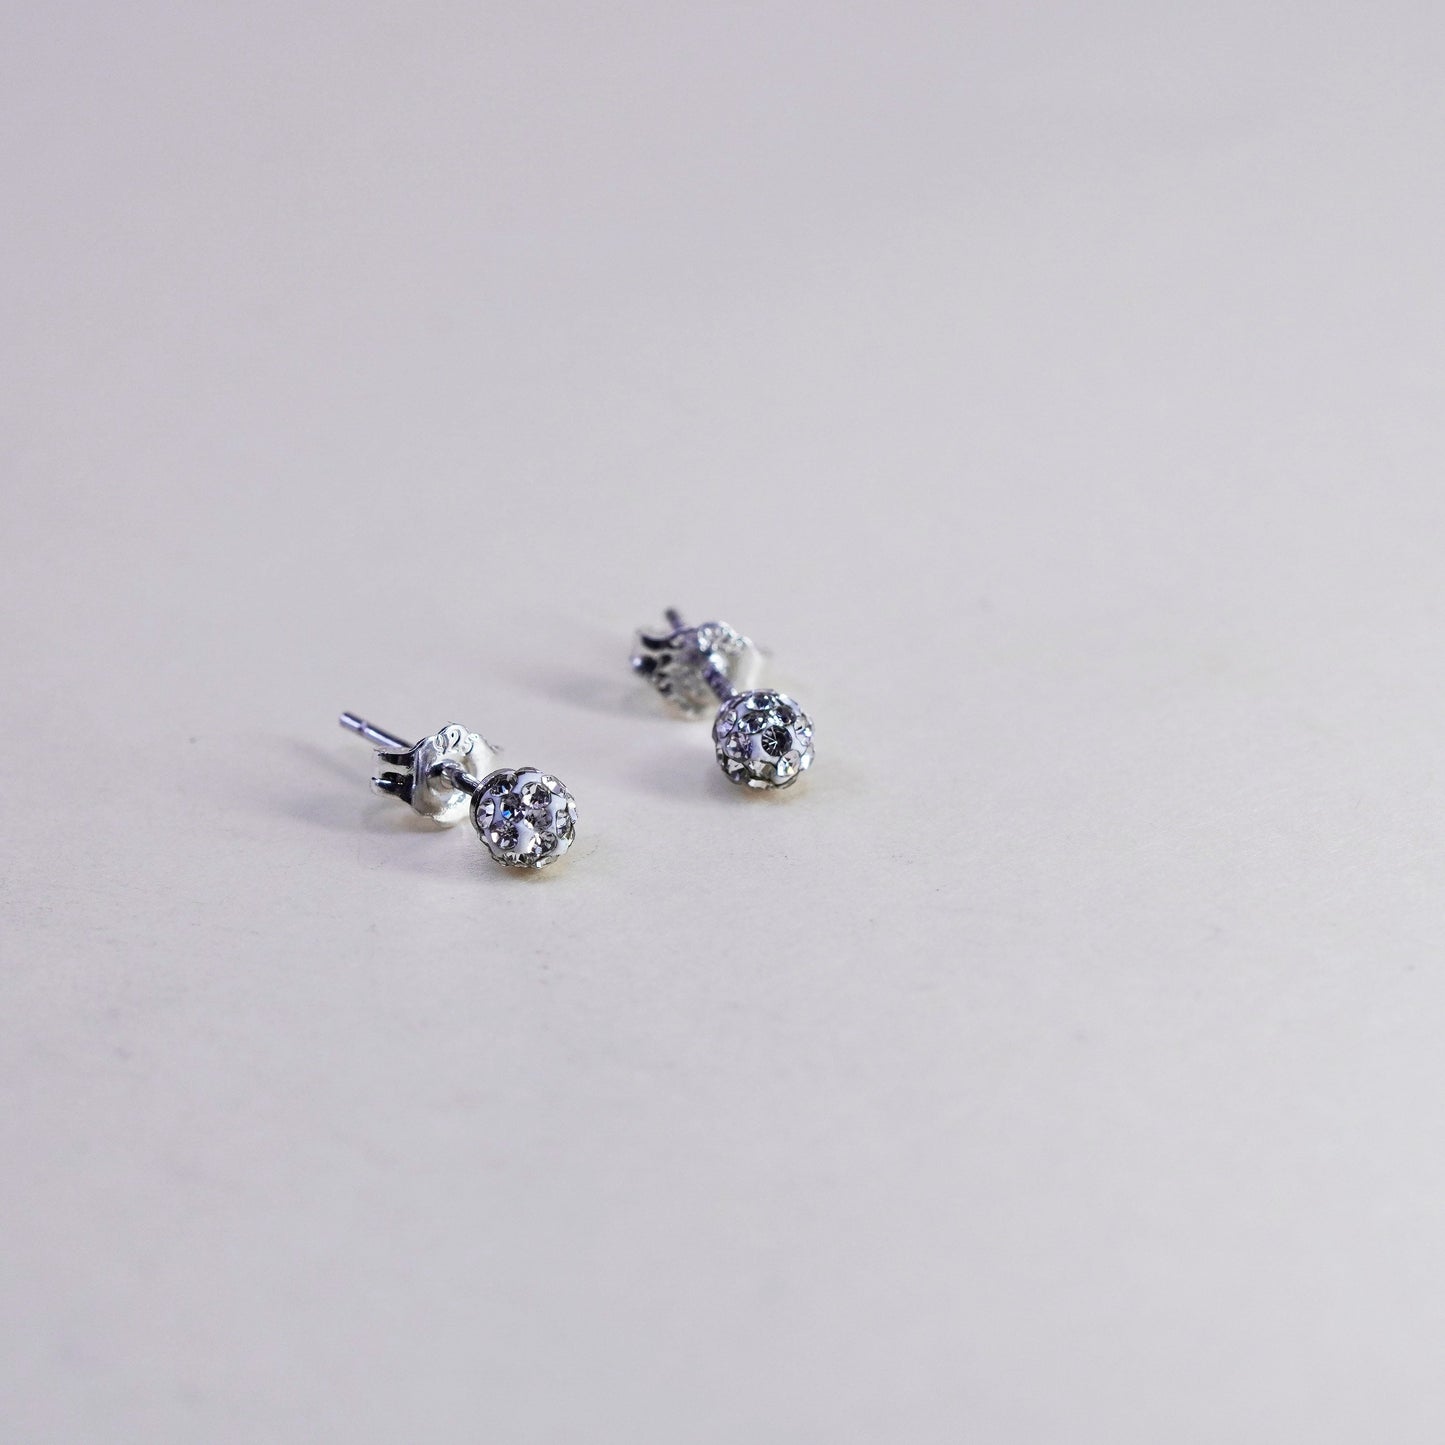 Vintage sterling silver handmade earrings, 925 silver studs with cluster cz